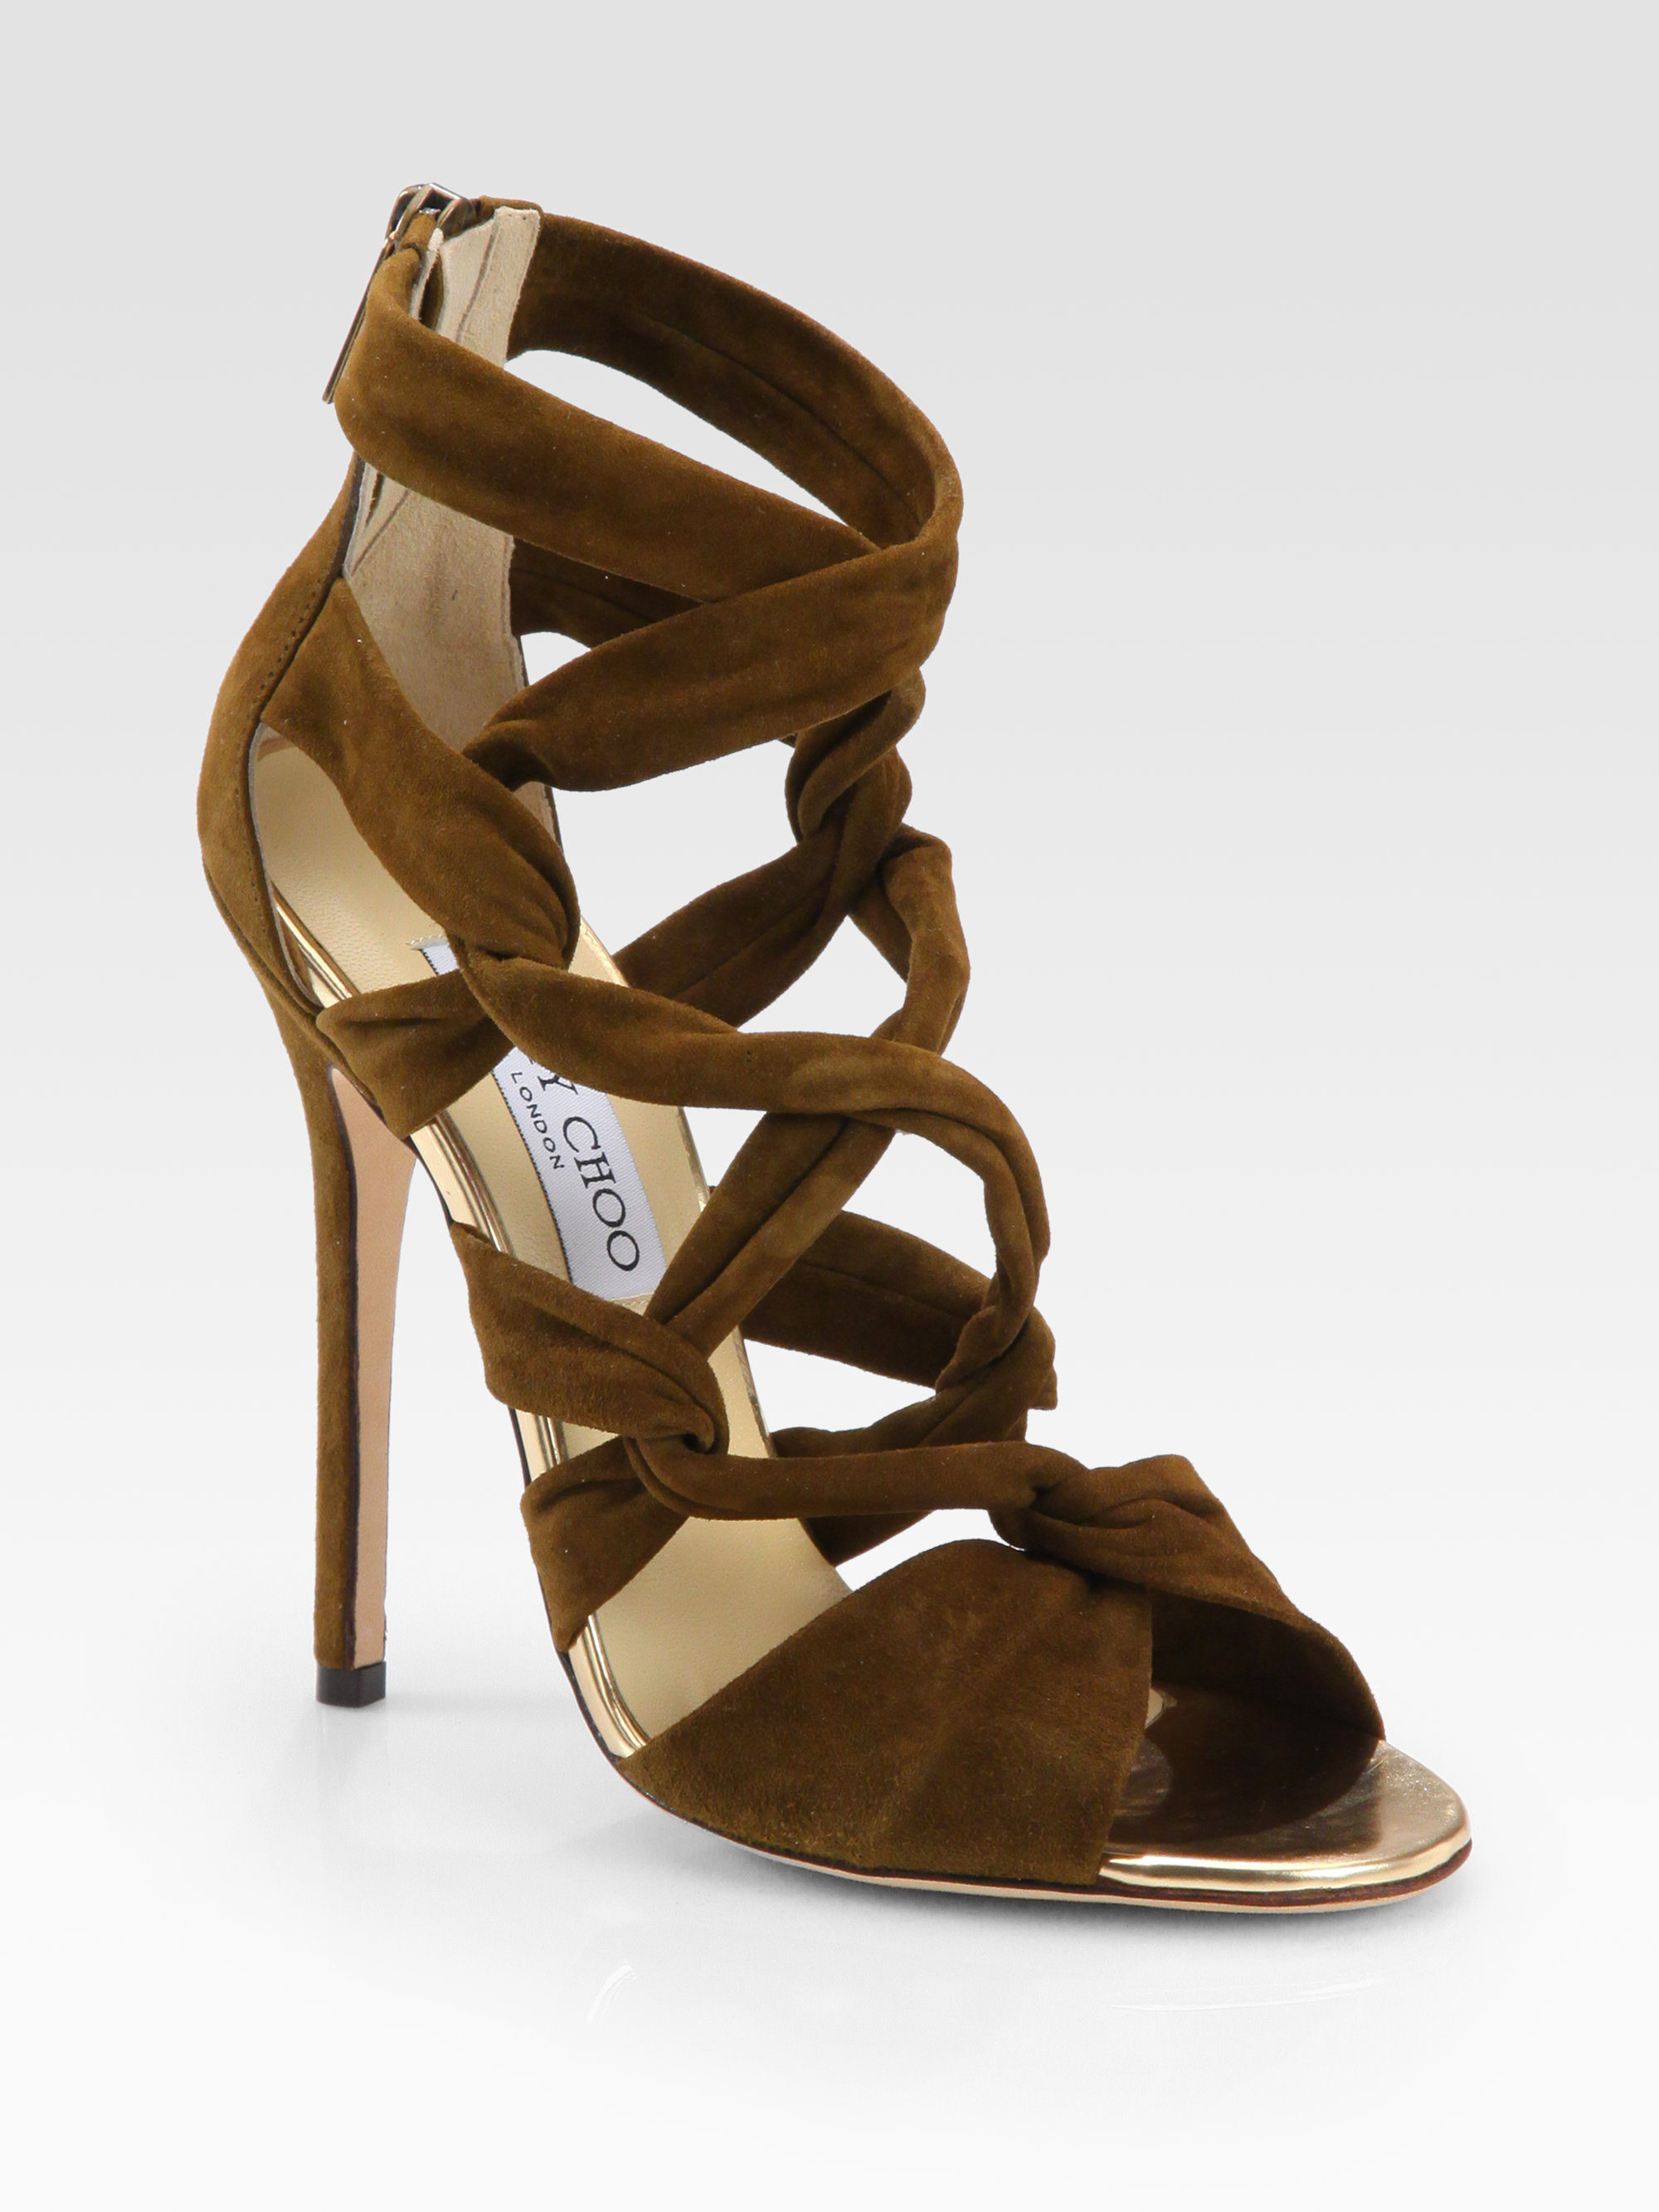 Jimmy Choo Kemble Knotted Suede Sandals in Brown - Lyst